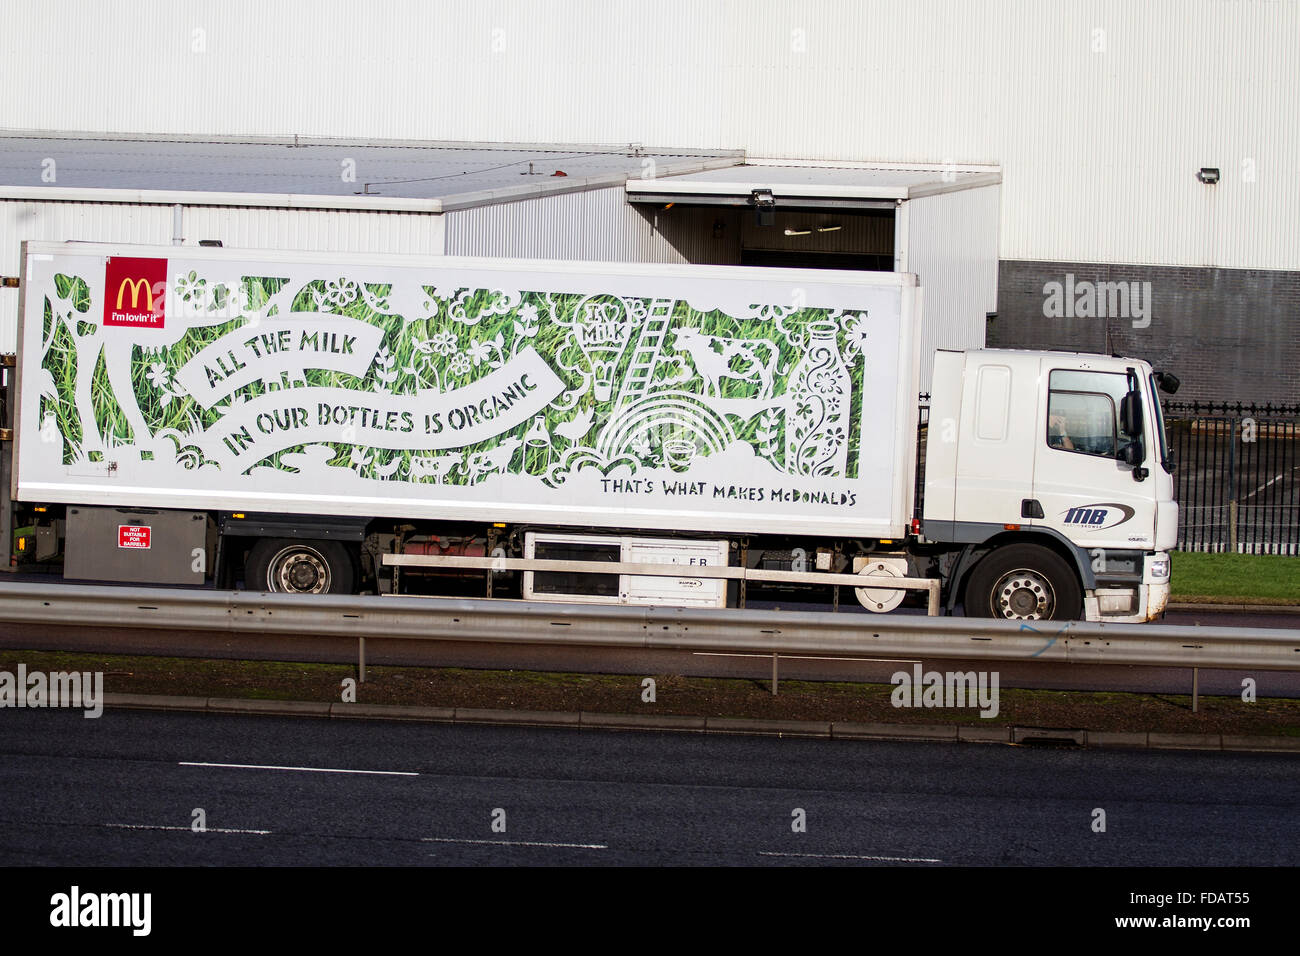 A McDonald`s lorry advertising 'All The Milk In Our Bottles Is Organic' travelling along the dual carriageway in Dundee, UK Stock Photo